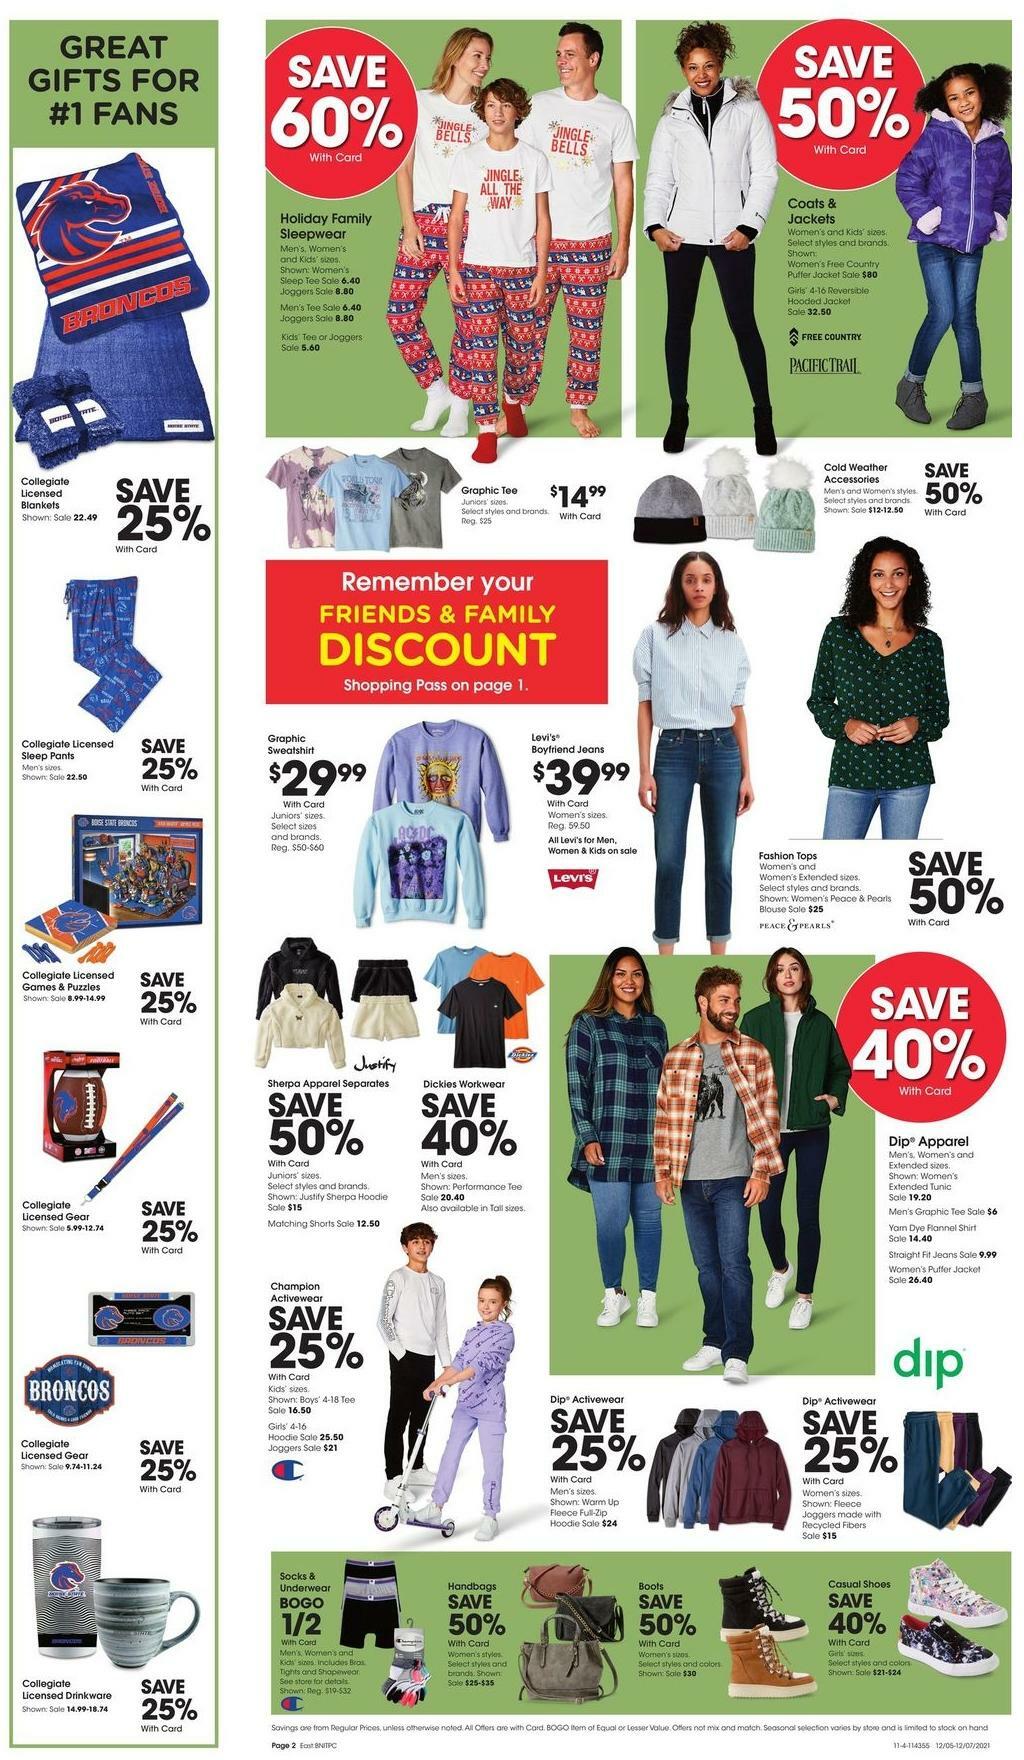 Fred Meyer 3-Day Sale Weekly Ad from December 5